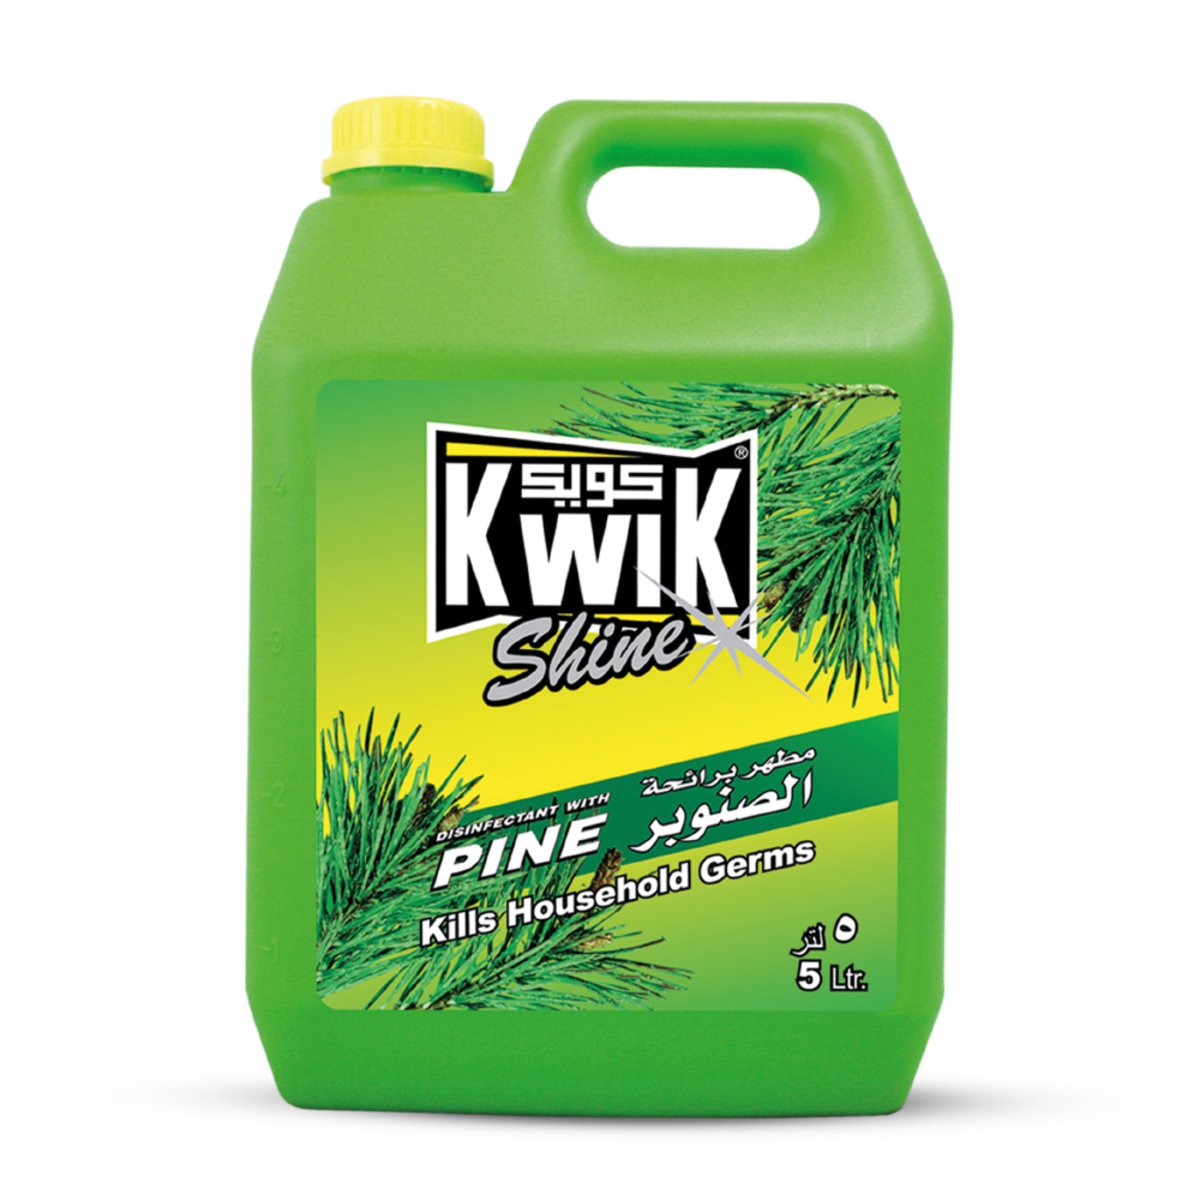 Kwik Shine Disinfectant with Pine 5Litre